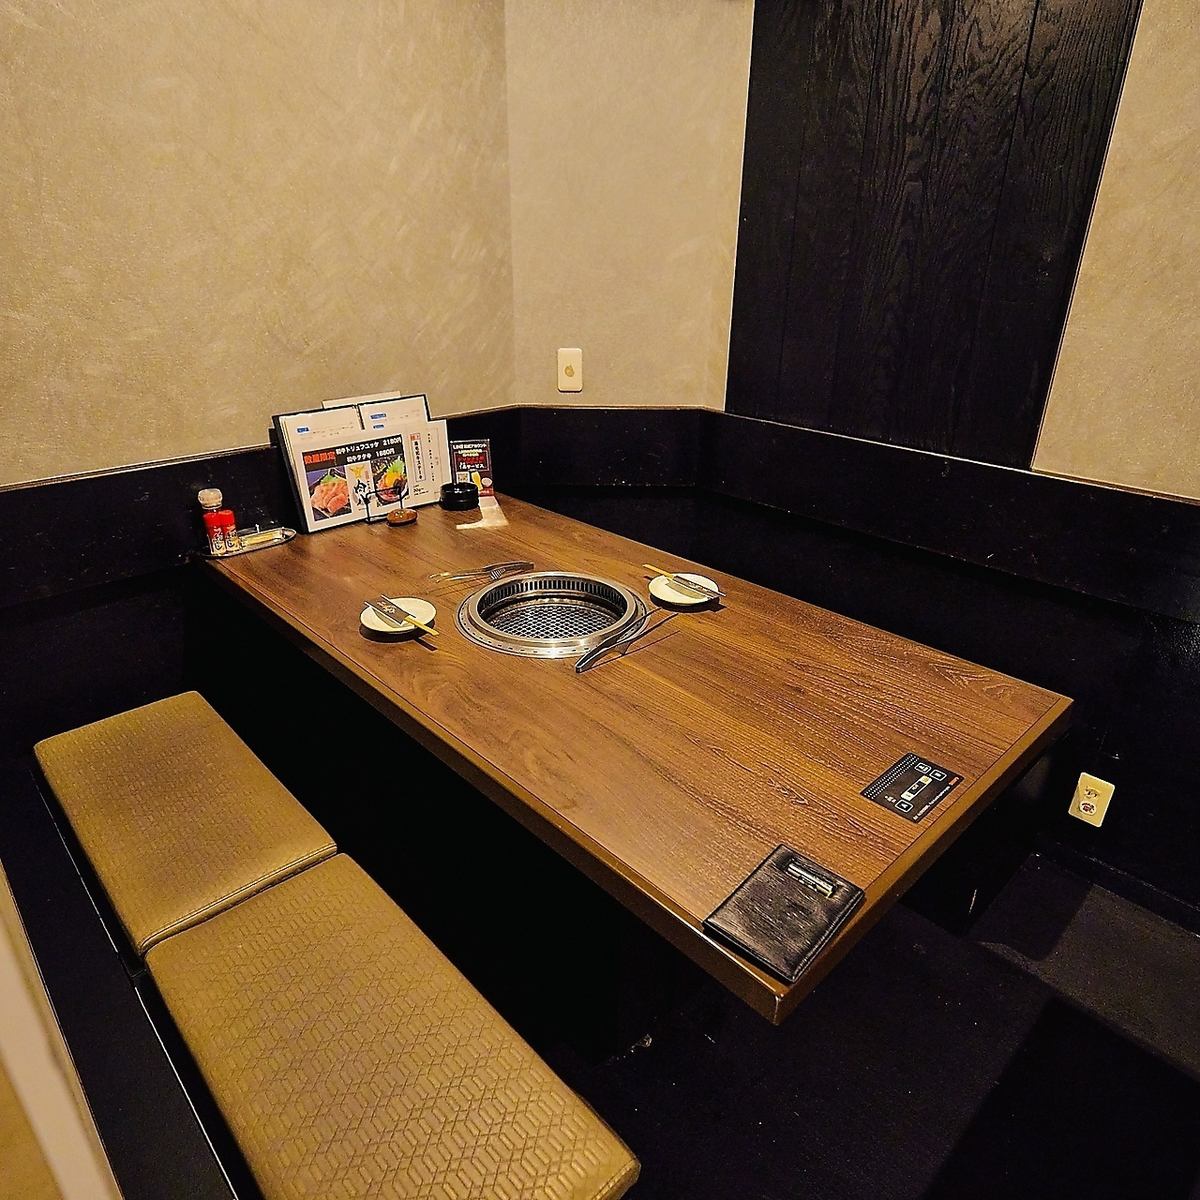 [Completely private room ◎] Ideal for dates in a calm atmosphere like a hideaway ◎